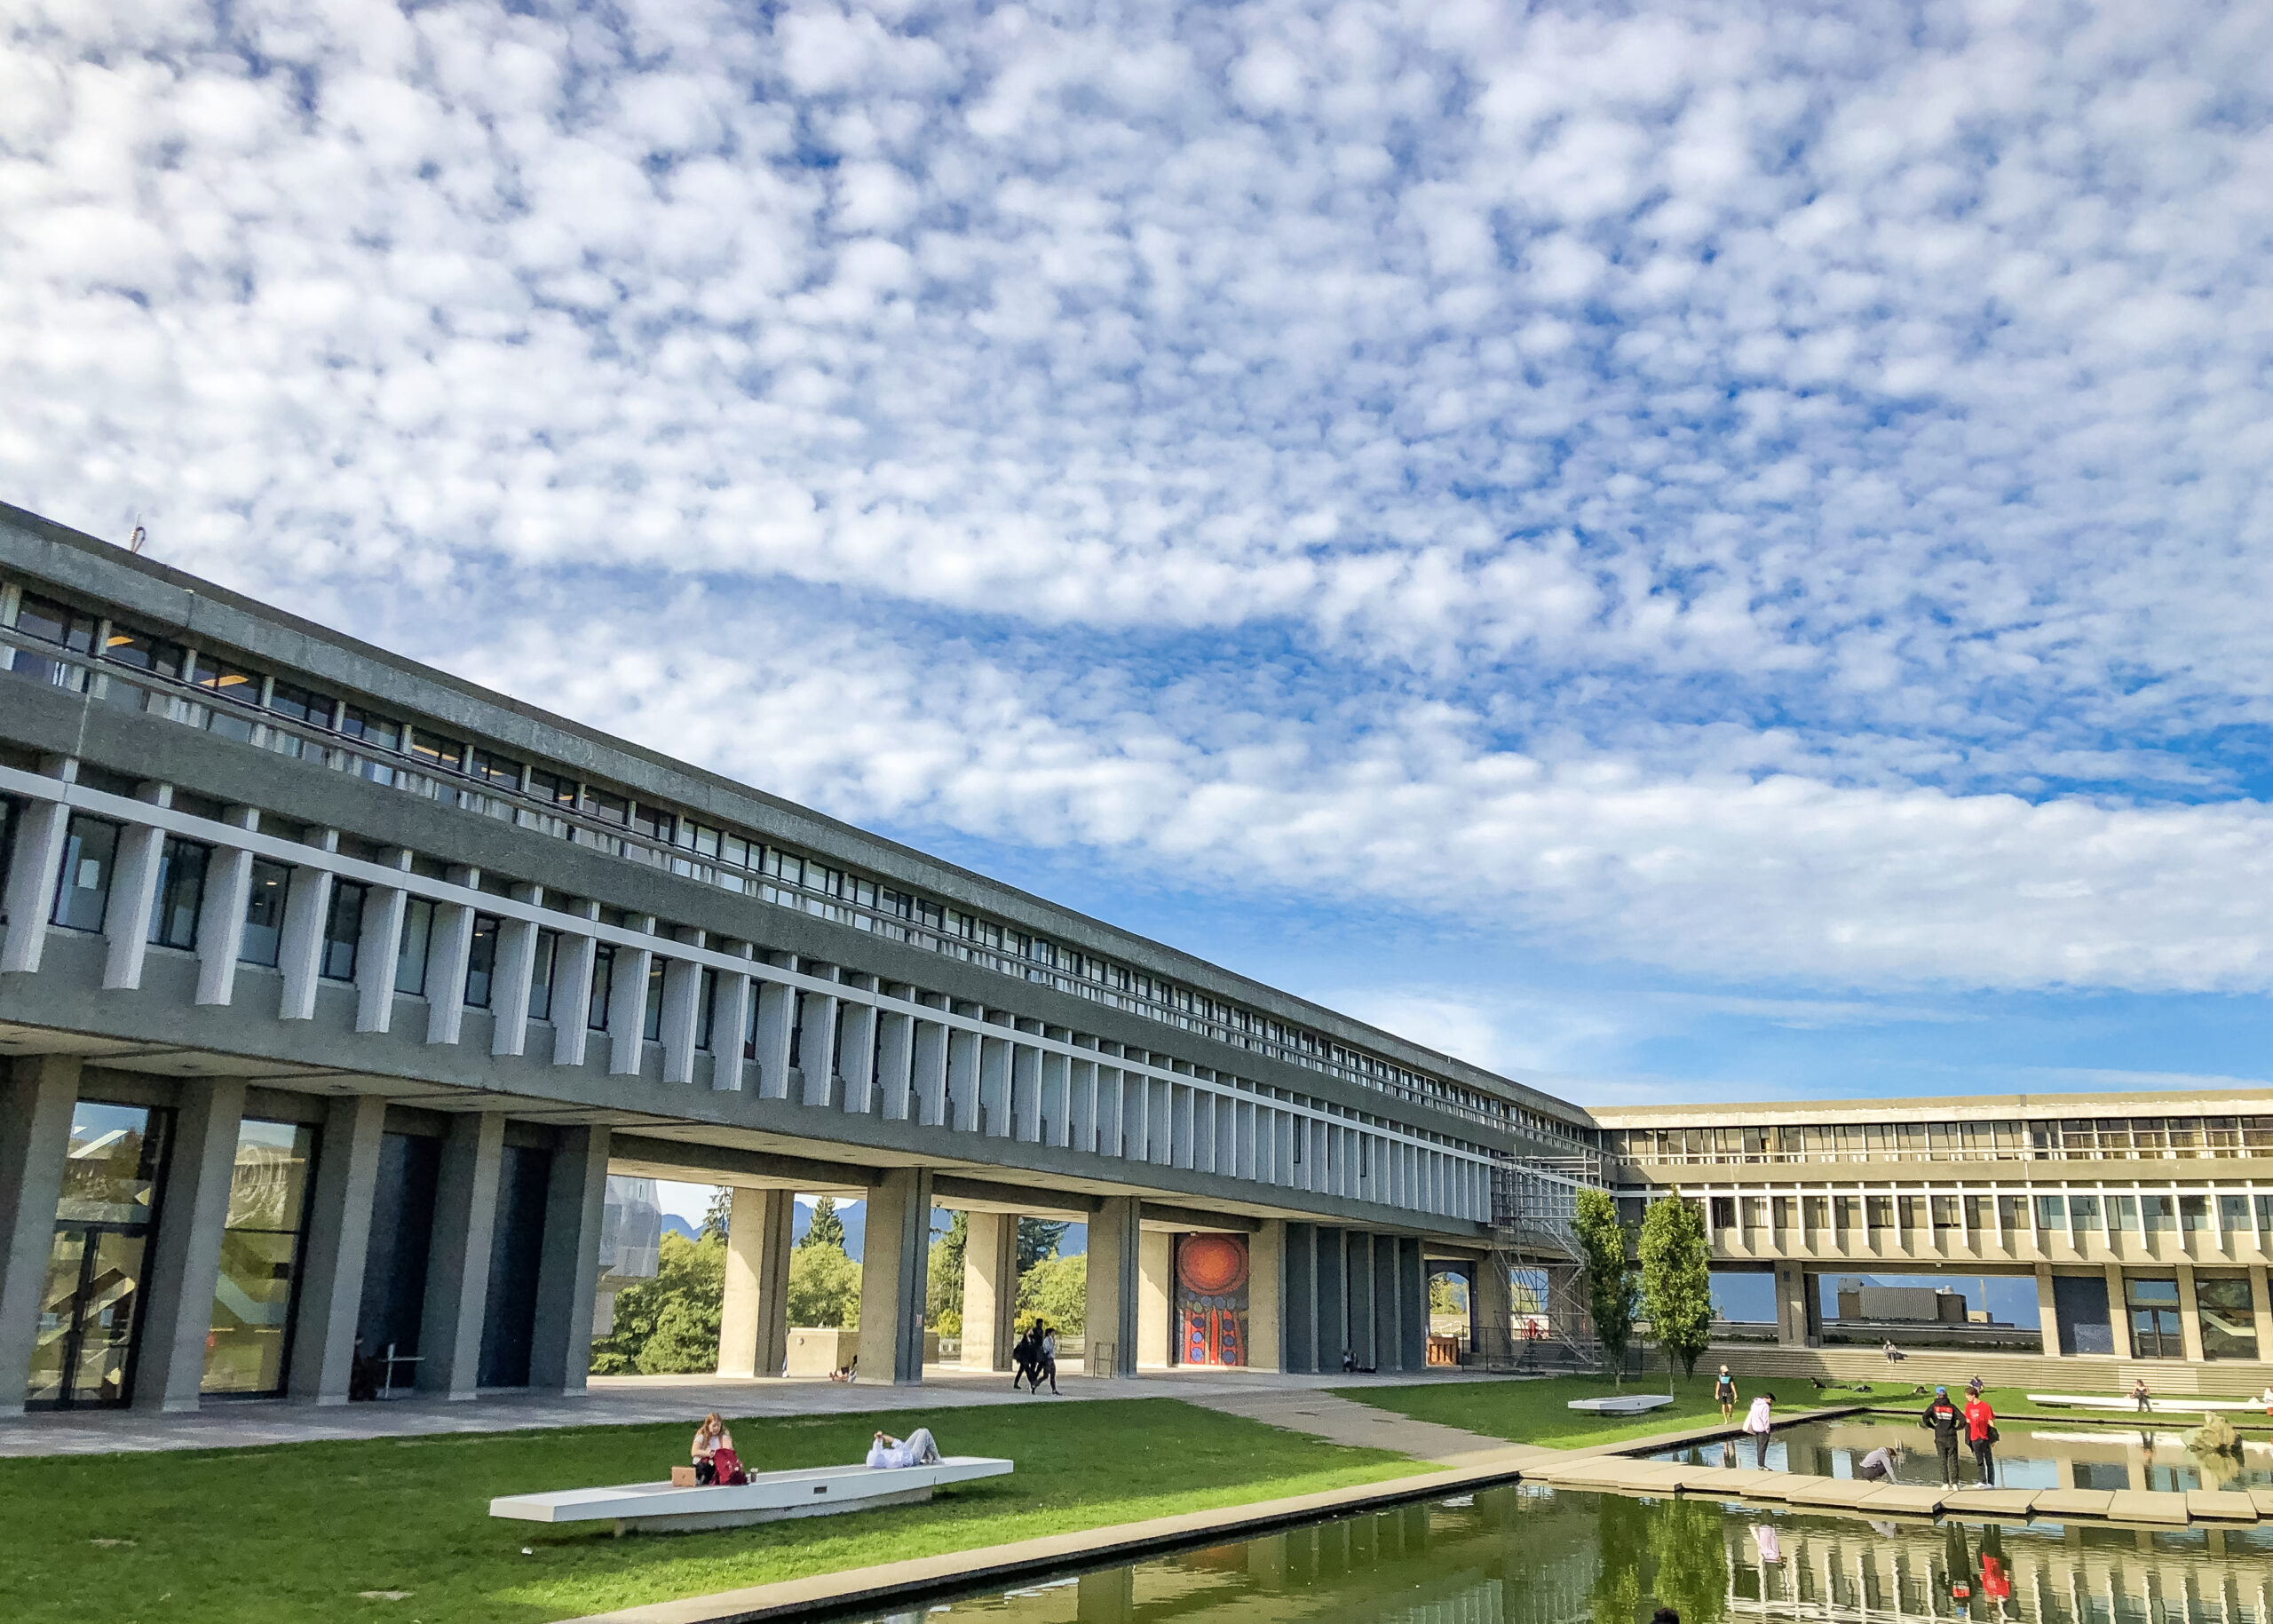 This is a photo of the academic quadrangle at the SFU Burnaby campus. In front of the building is students sitting on the green grass.